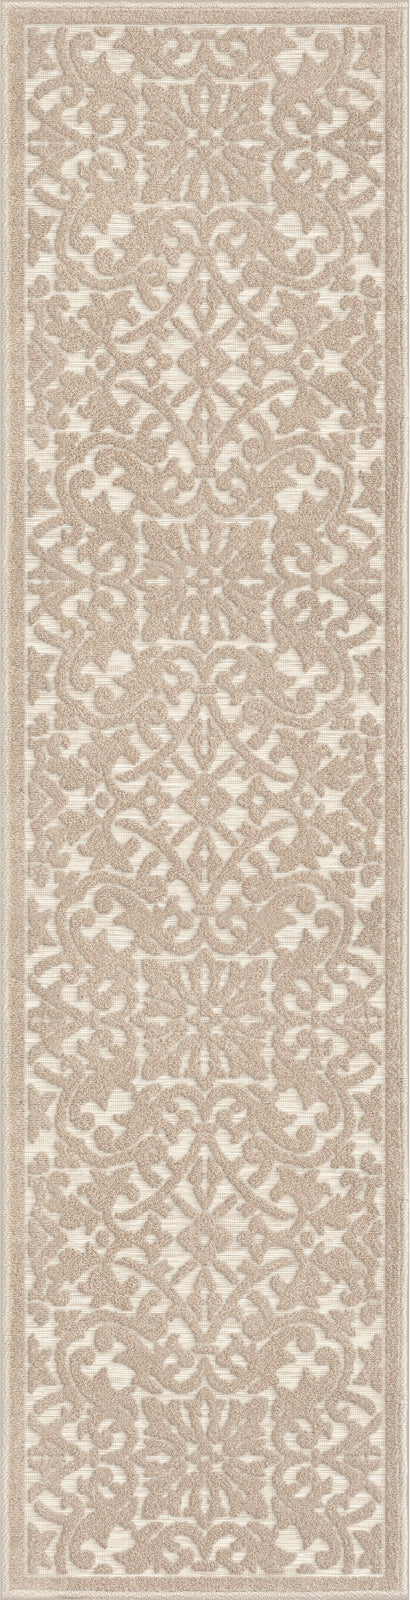 Orian Rugs Boucle' Biscay Driftwood Area Rug main image